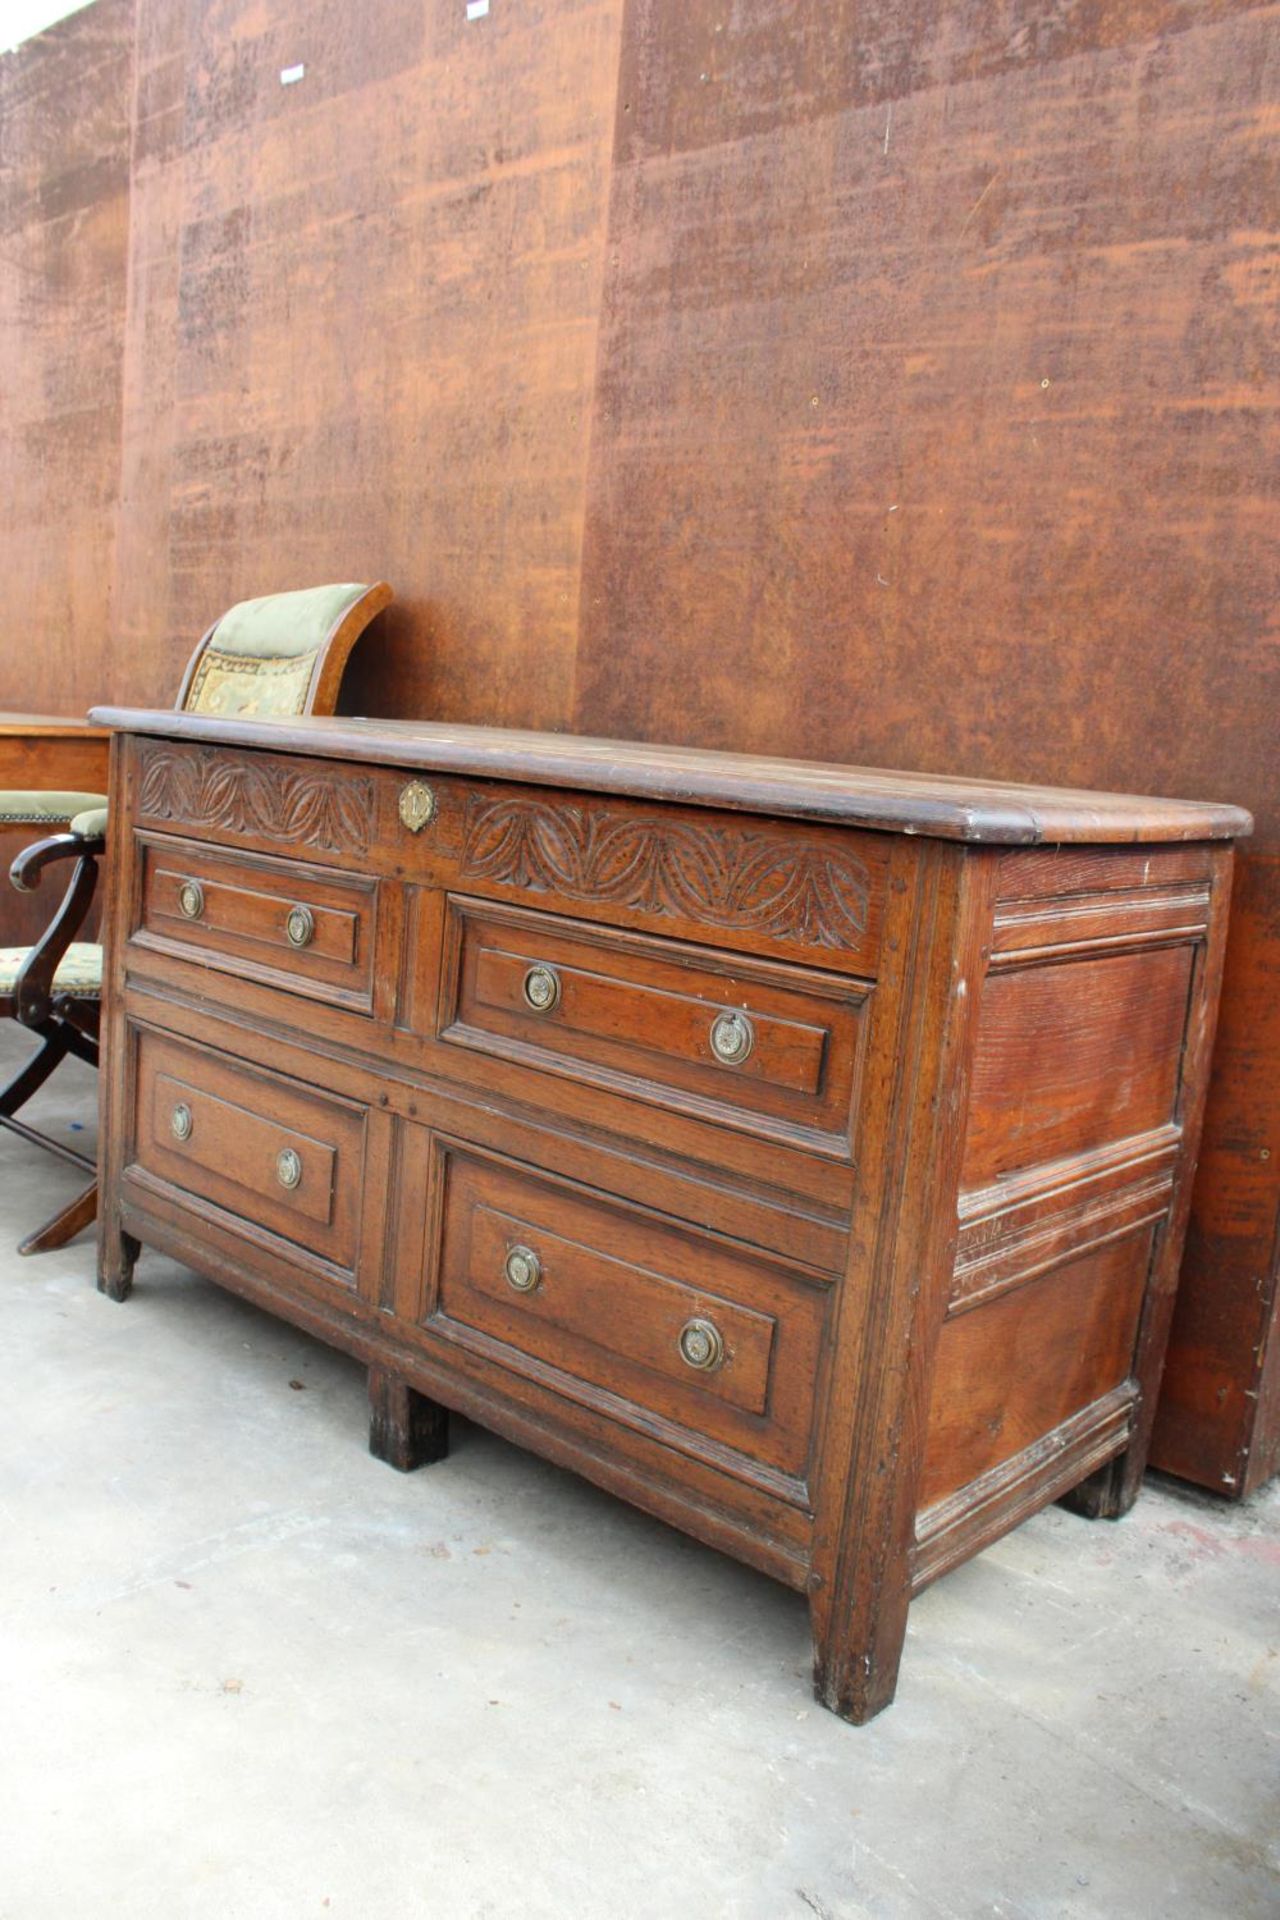 A GEORGE III OAK BLANKET CHEST WITH CARVED FRIEZE AND 4 SHAM DRAWERS, 52" WIDE - Image 2 of 5